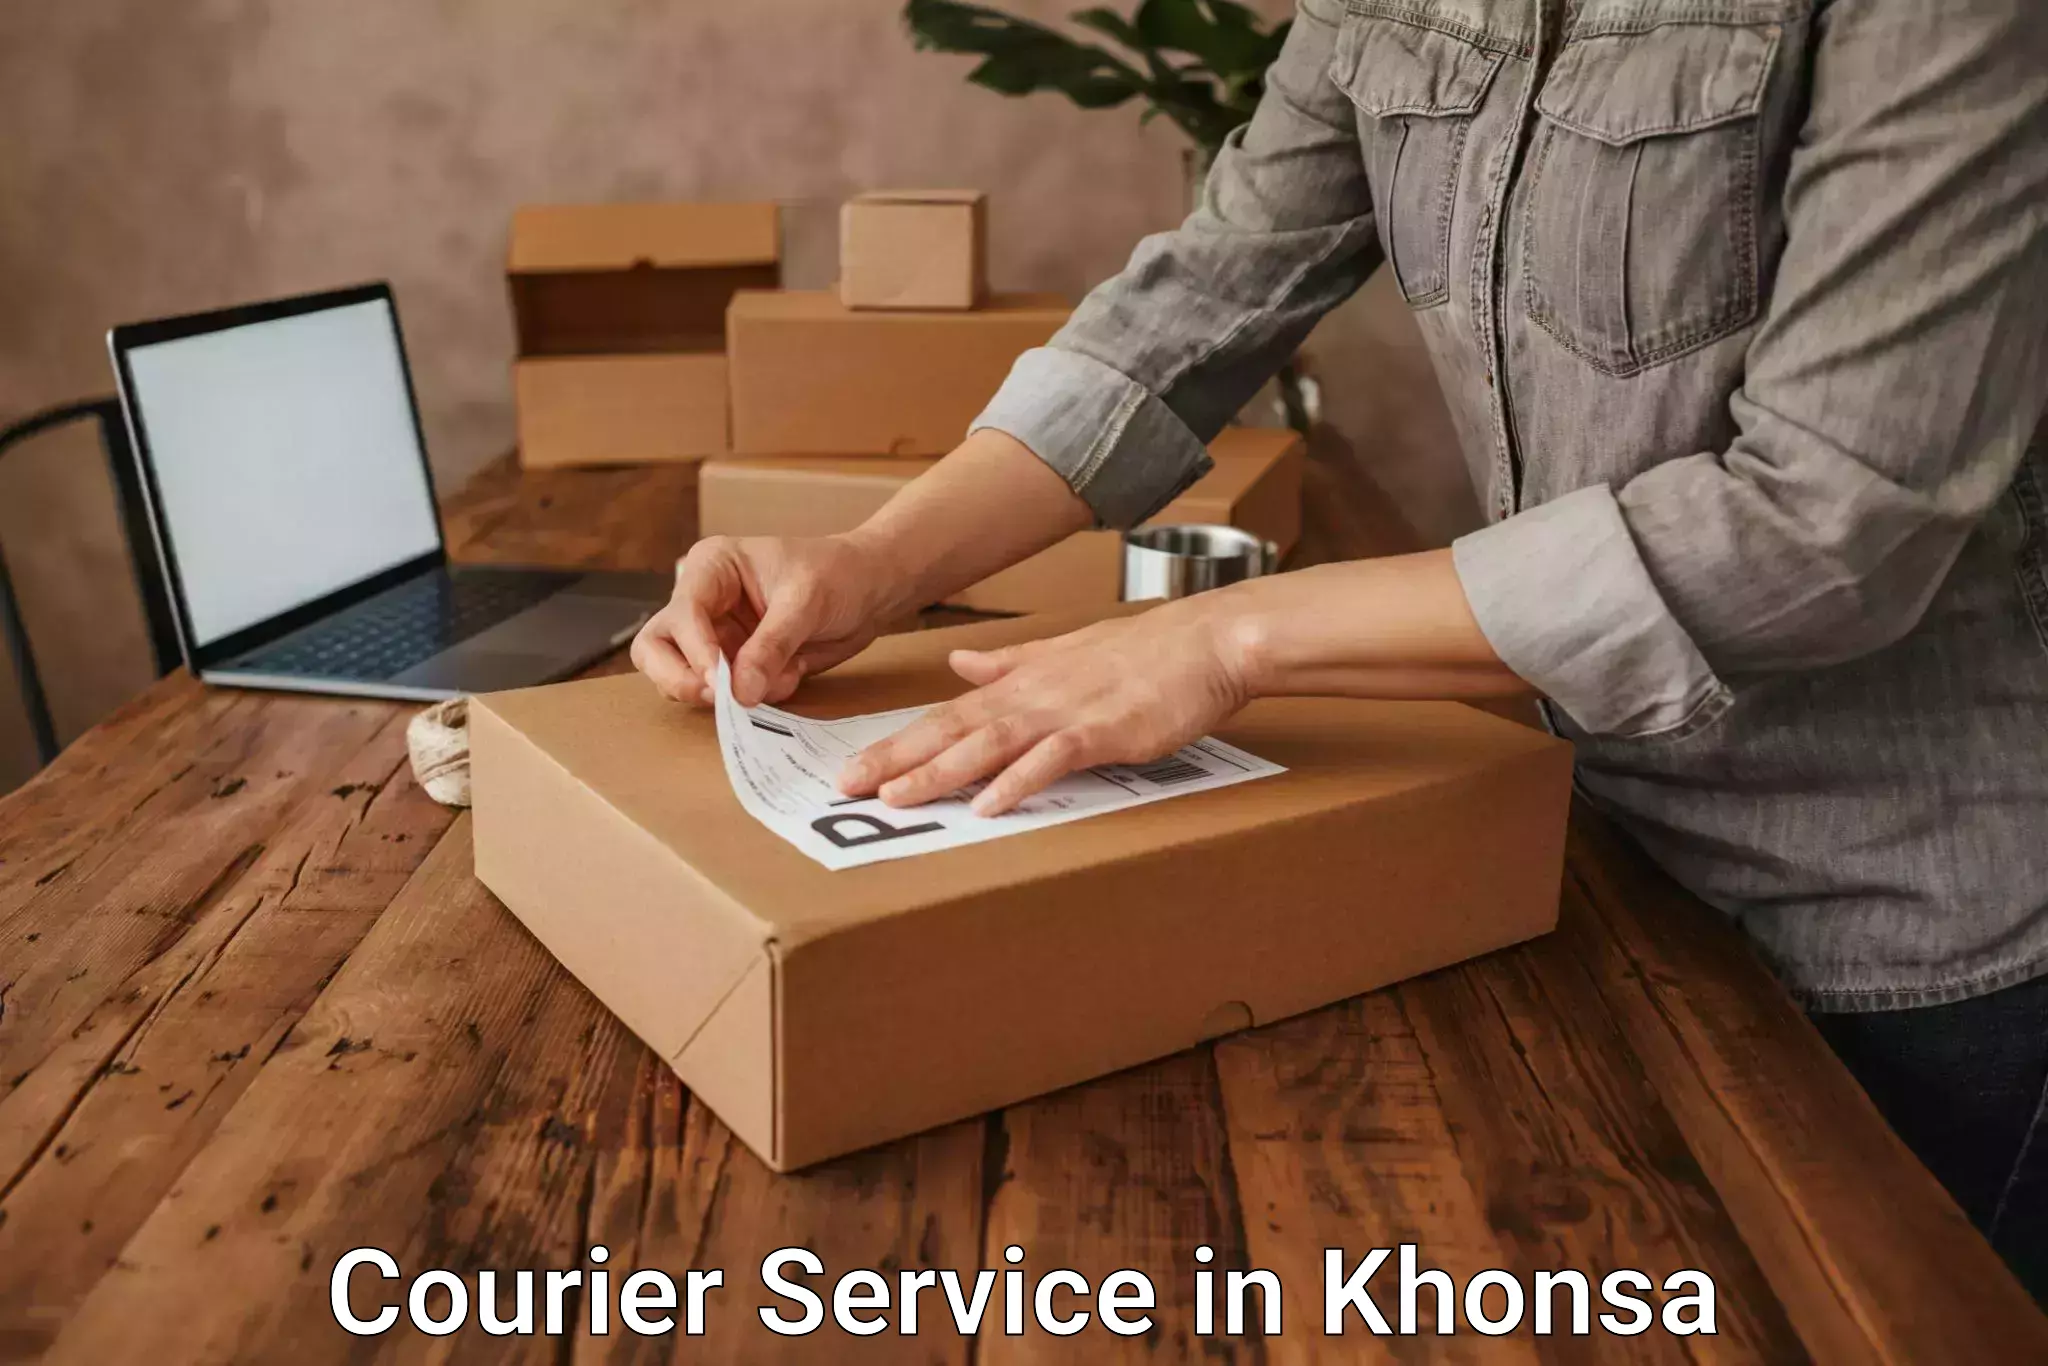 Customer-friendly courier services in Khonsa